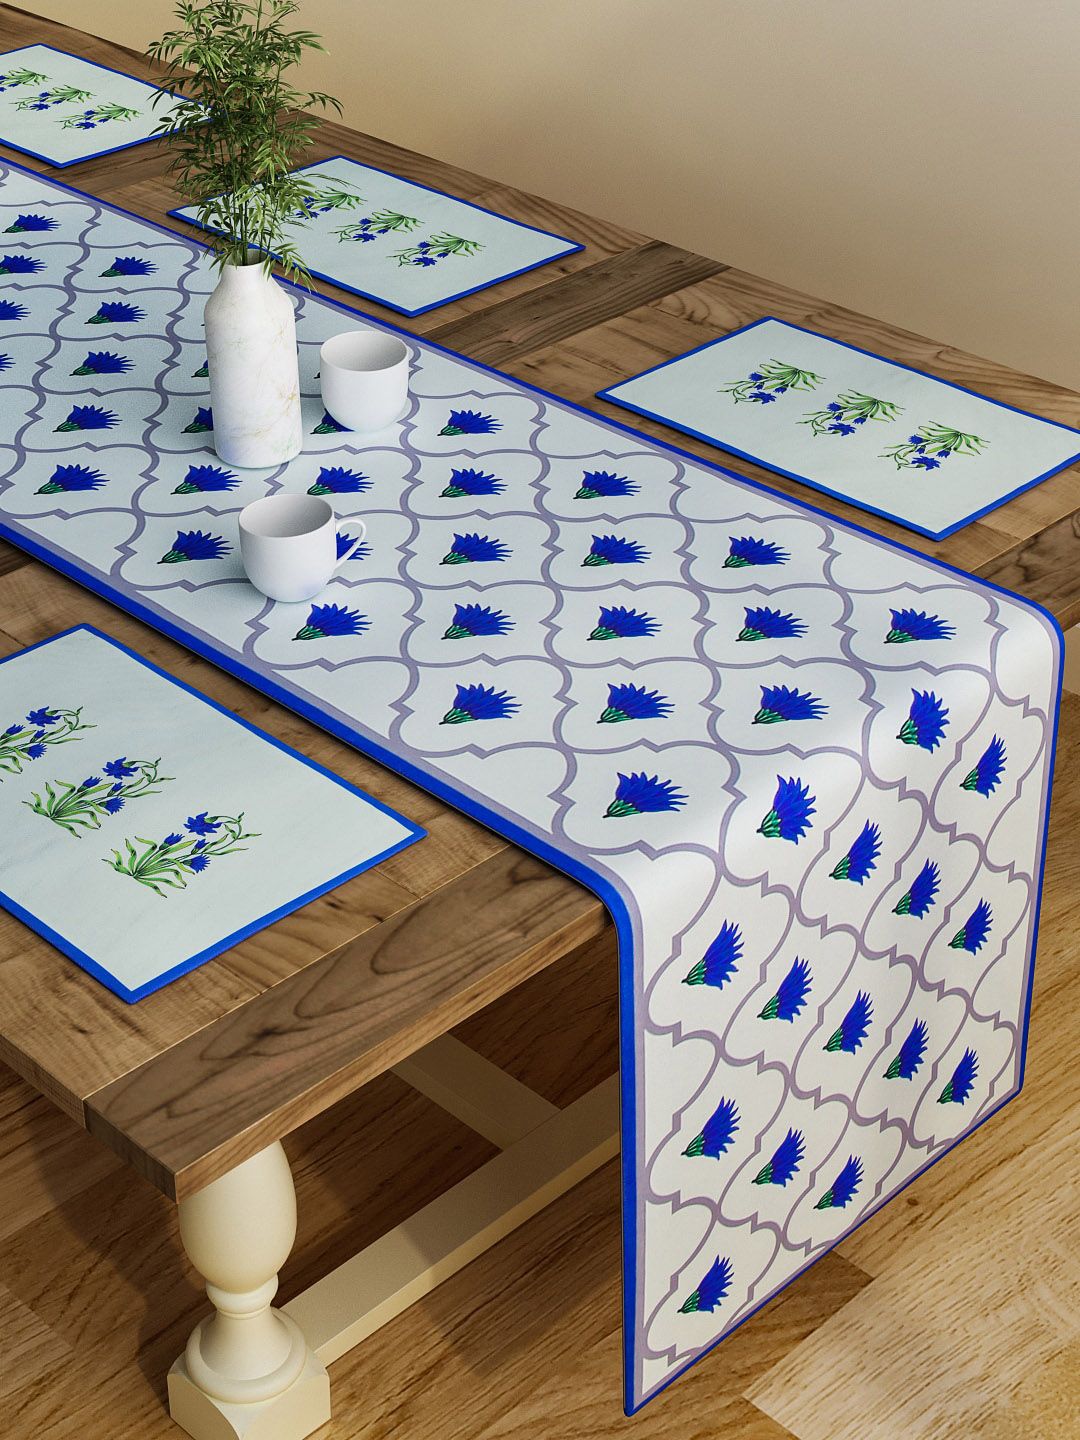 SEJ by Nisha Gupta Set of 6 Blue Printed Cotton Table Placemats and Runner Price in India